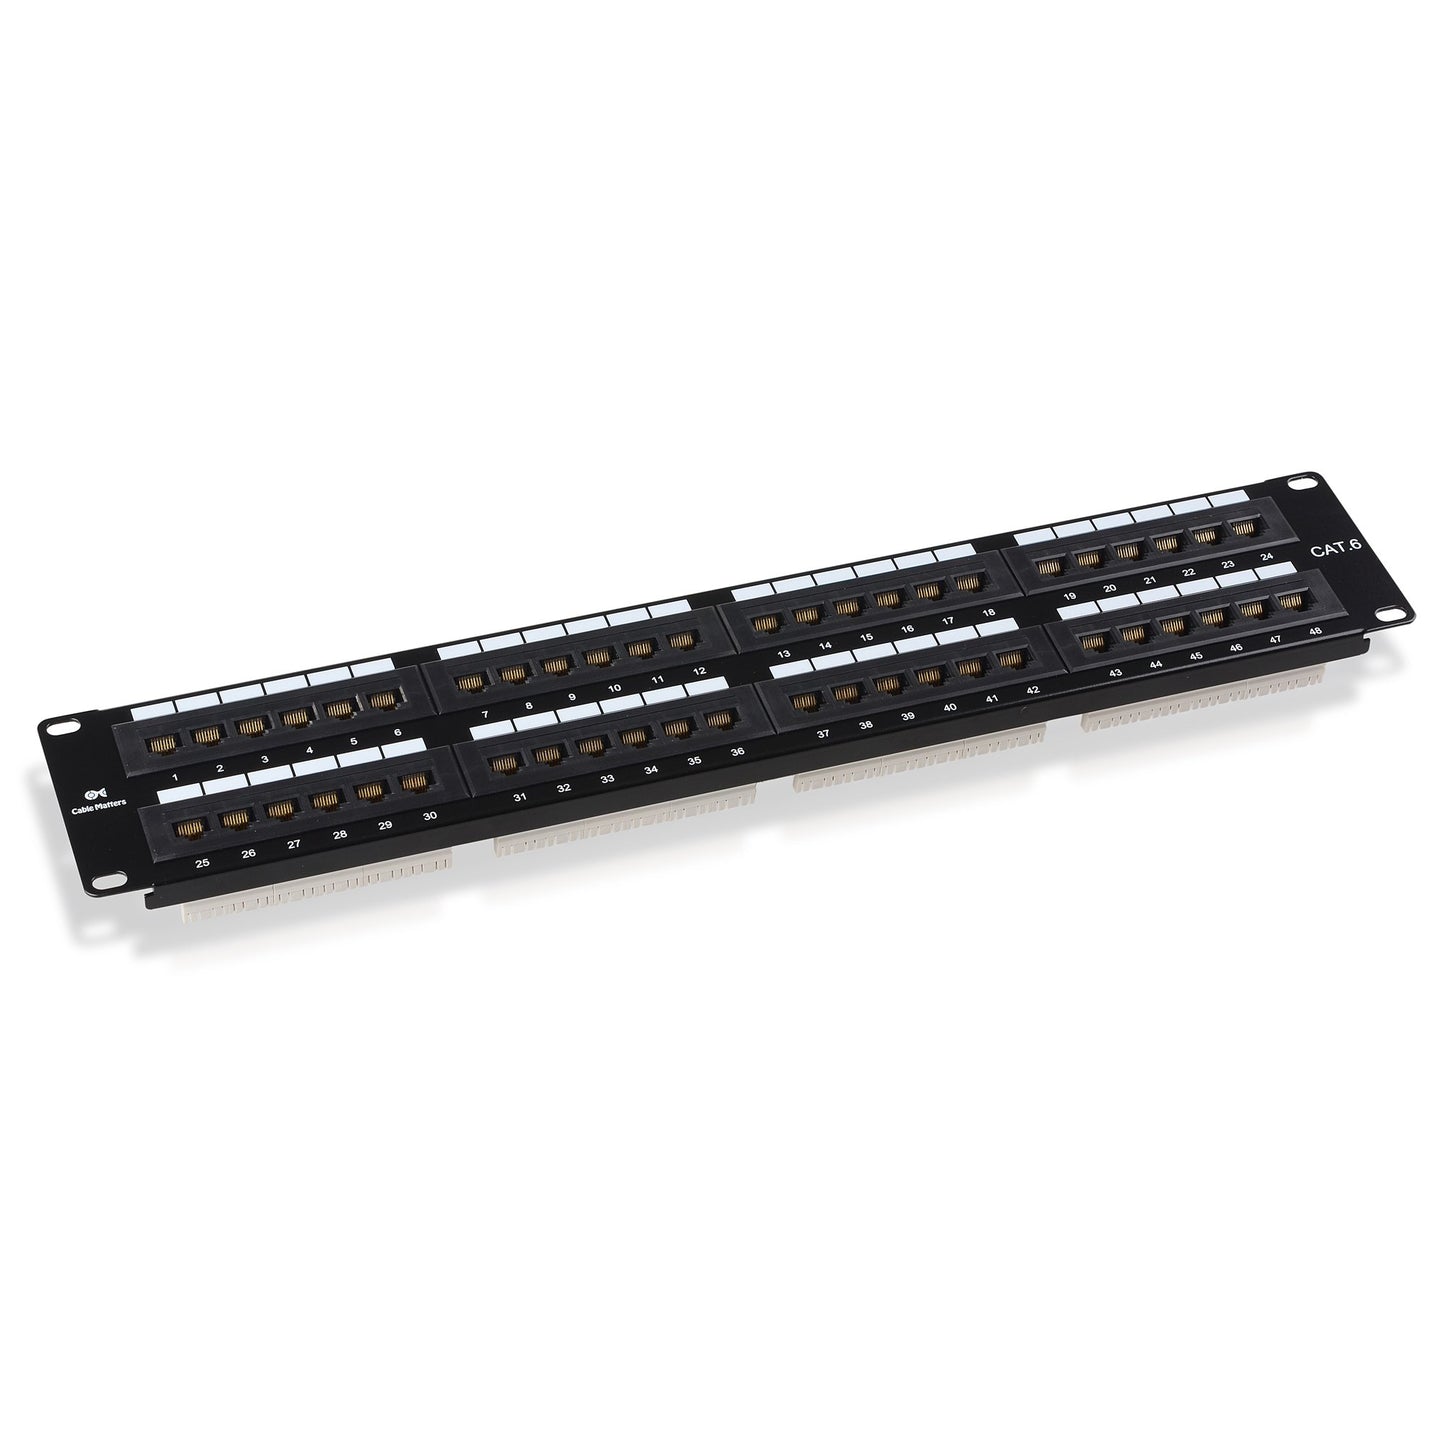 Cable Matters UL Listed Rackmount or Wall Mount 48 Port Network Patch Panel (Cat6 Patch Panel / RJ45 Patch Panel)